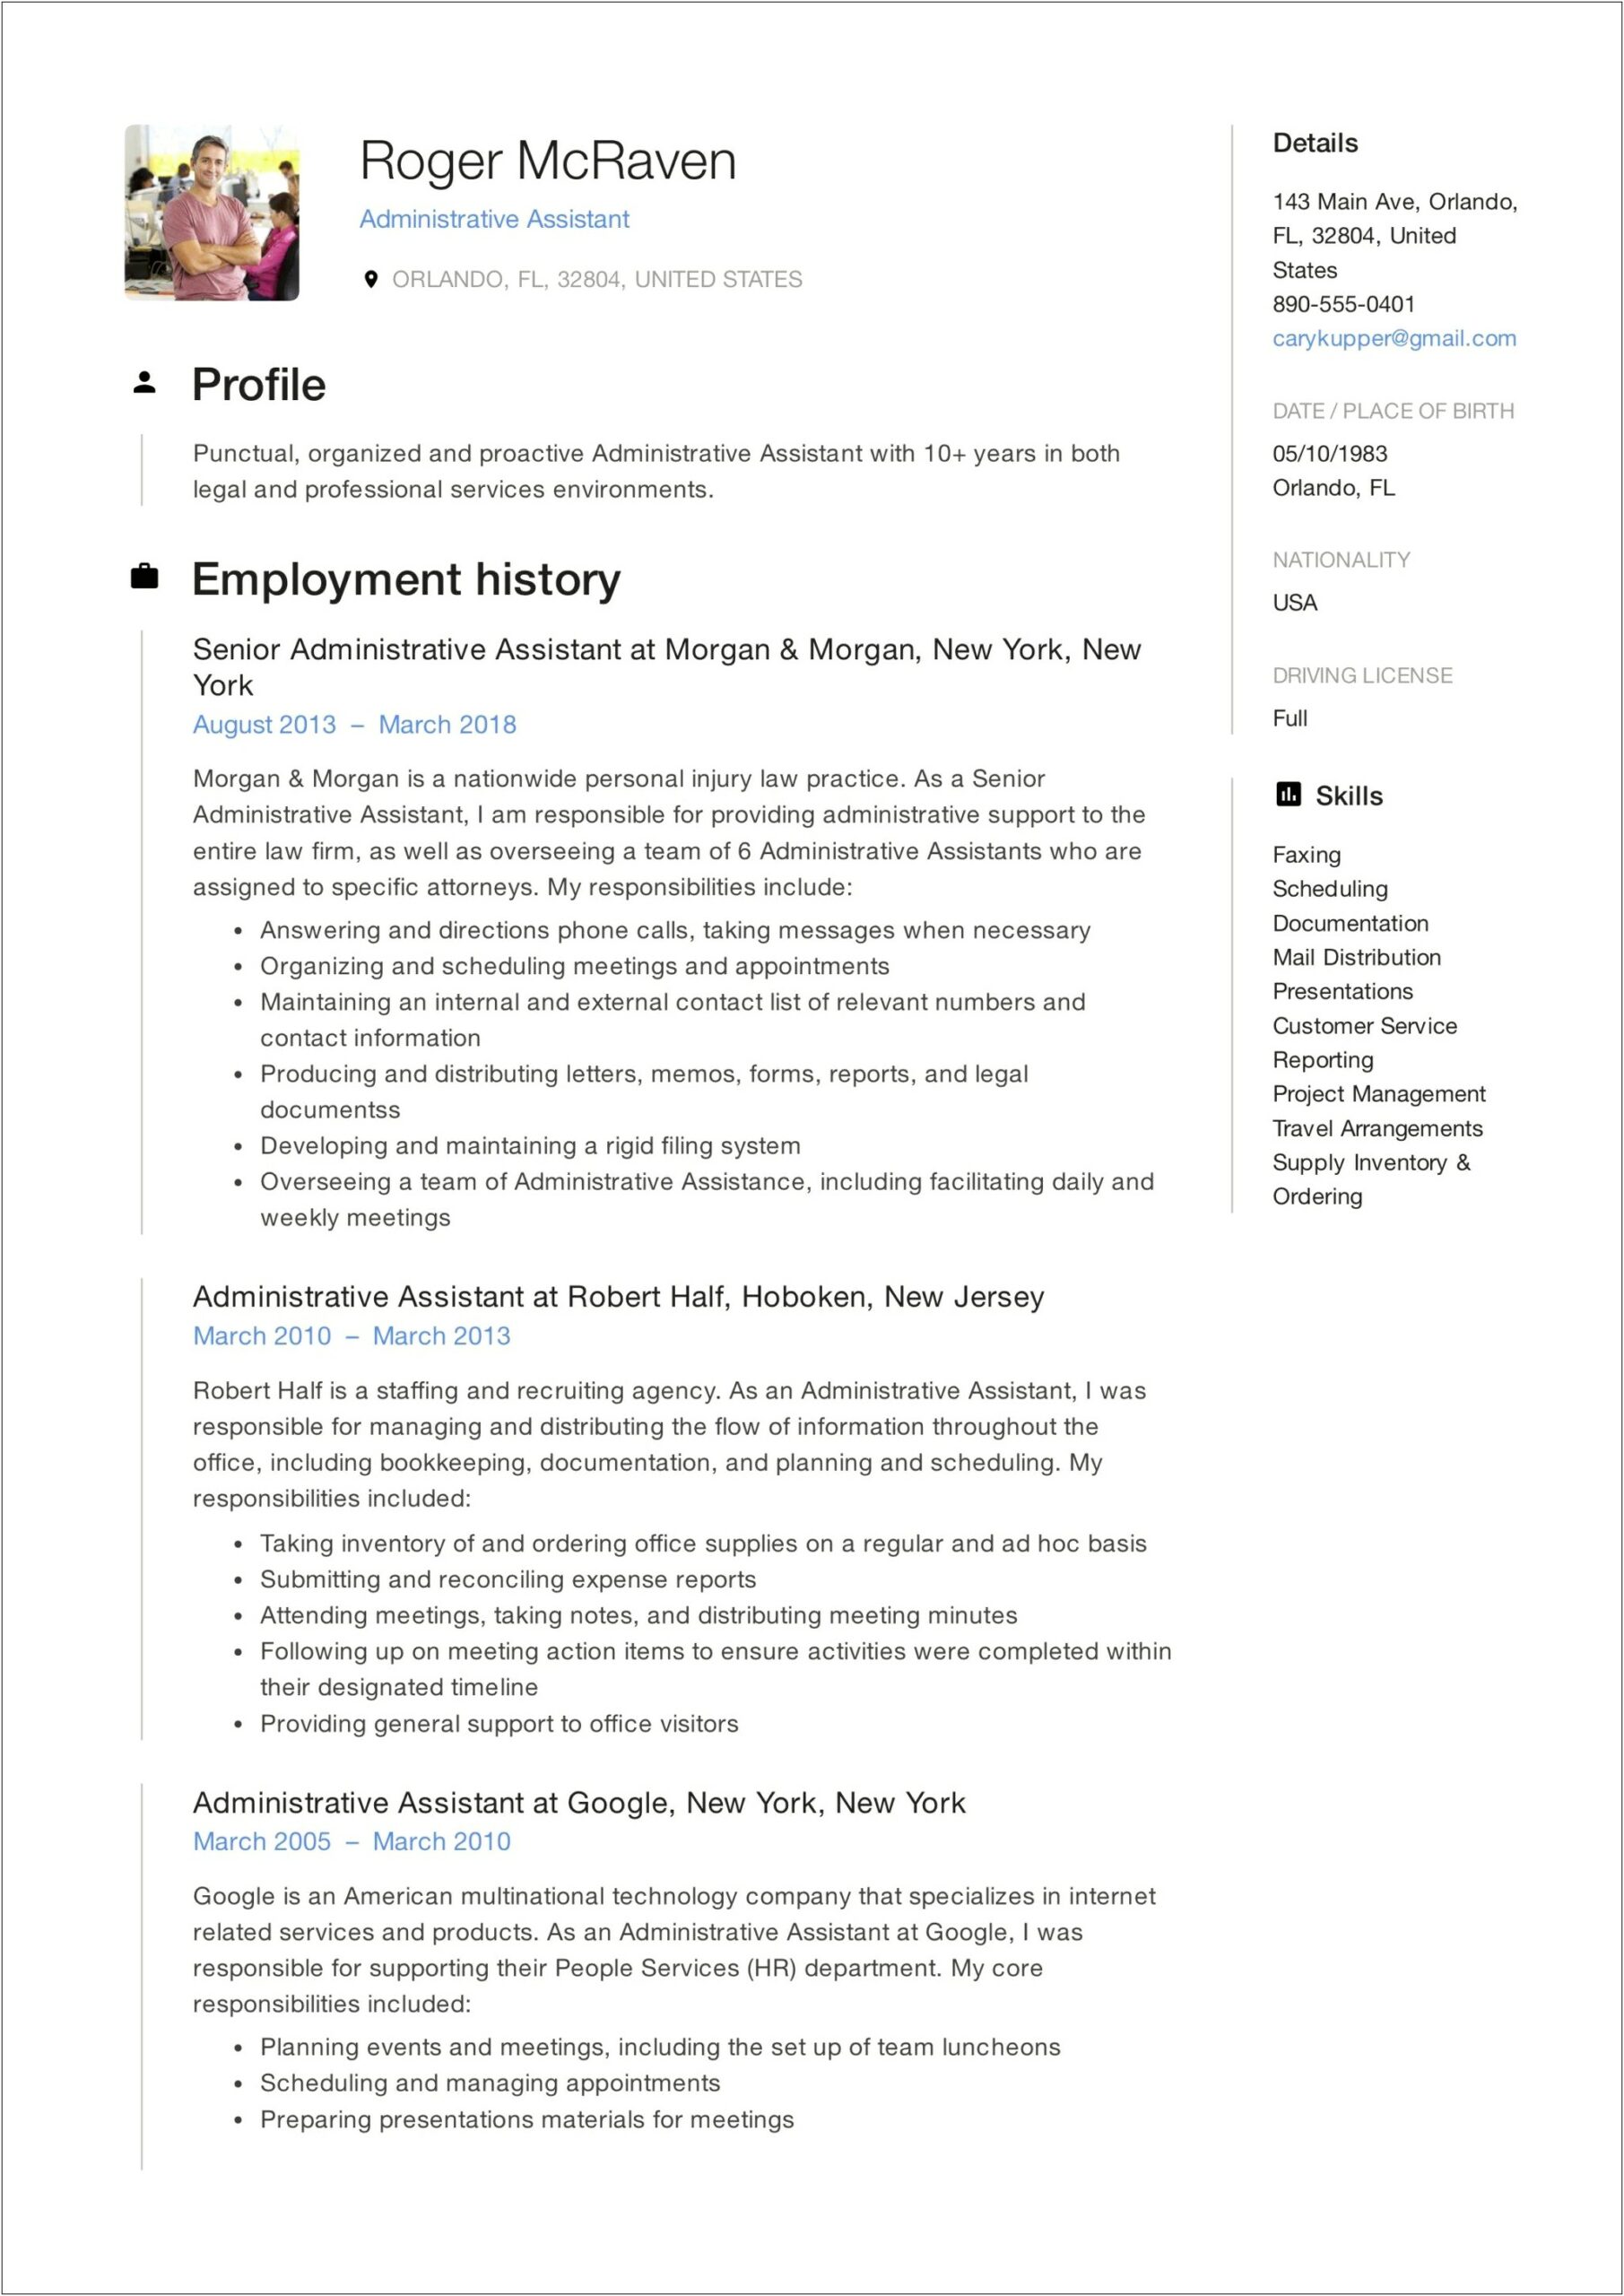 Resume Objective Of Administrative Assistant